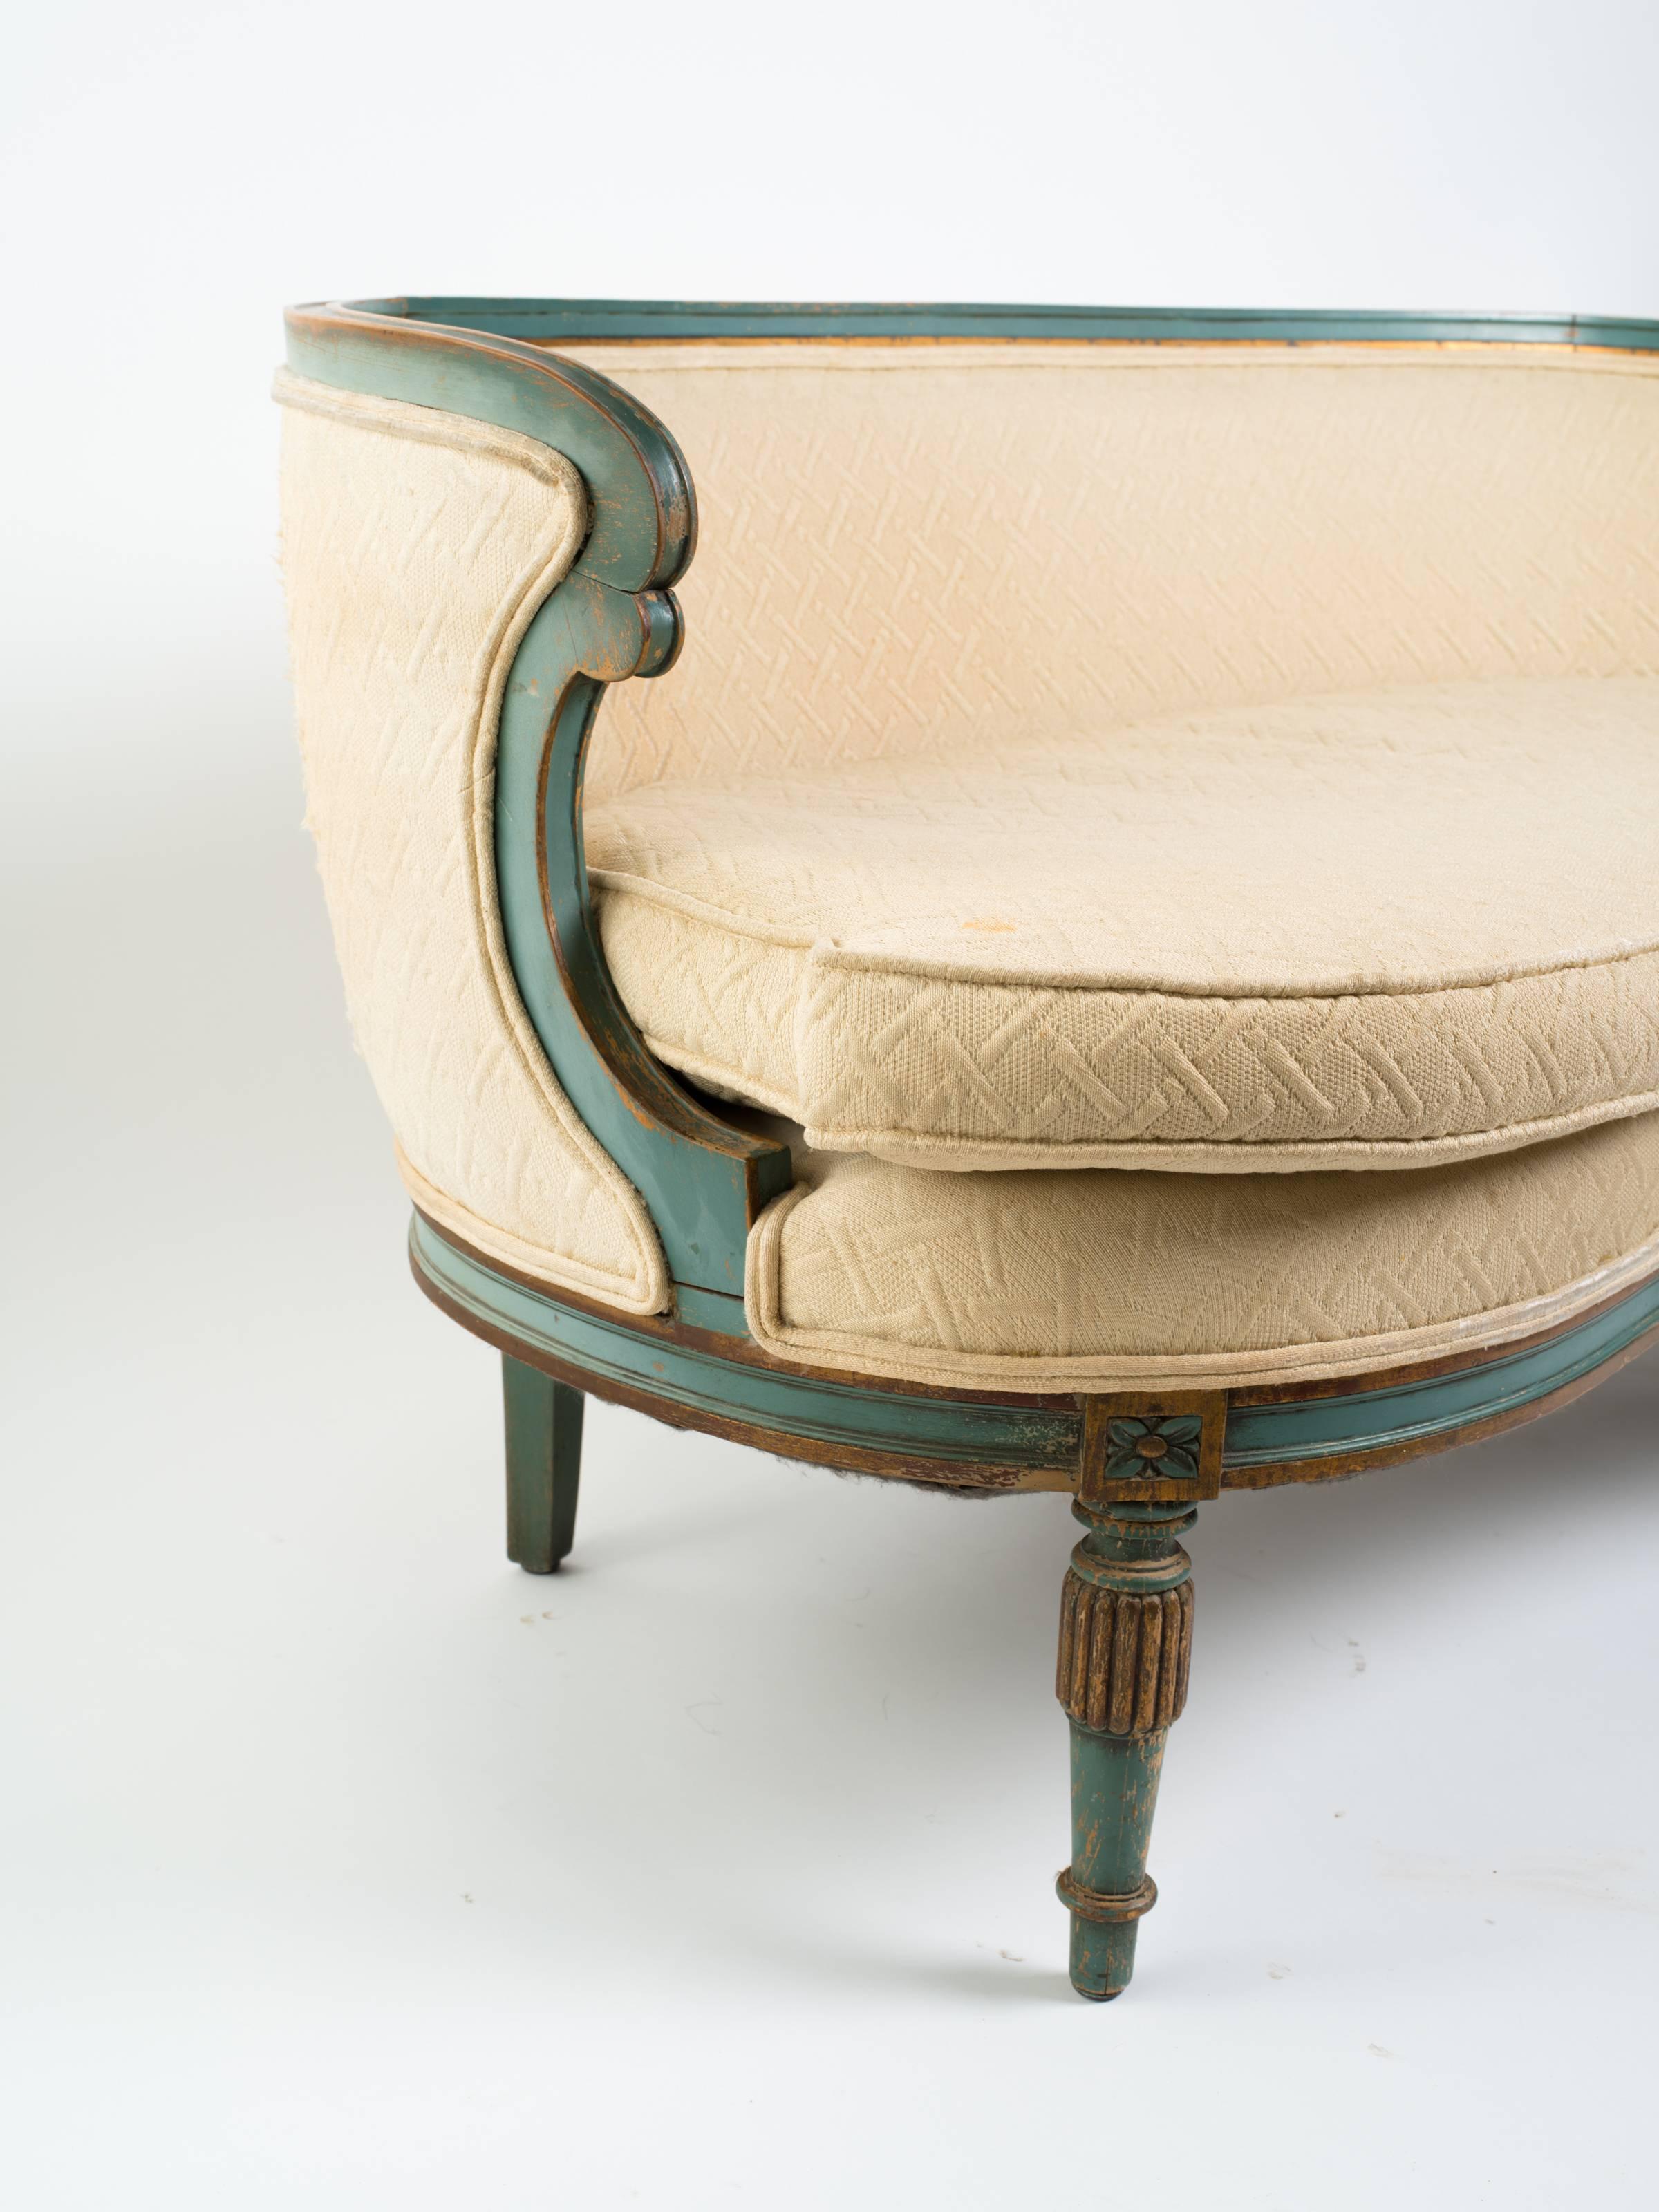 Turn of the century French Regency style curved settee. Painted blue/green with gold.